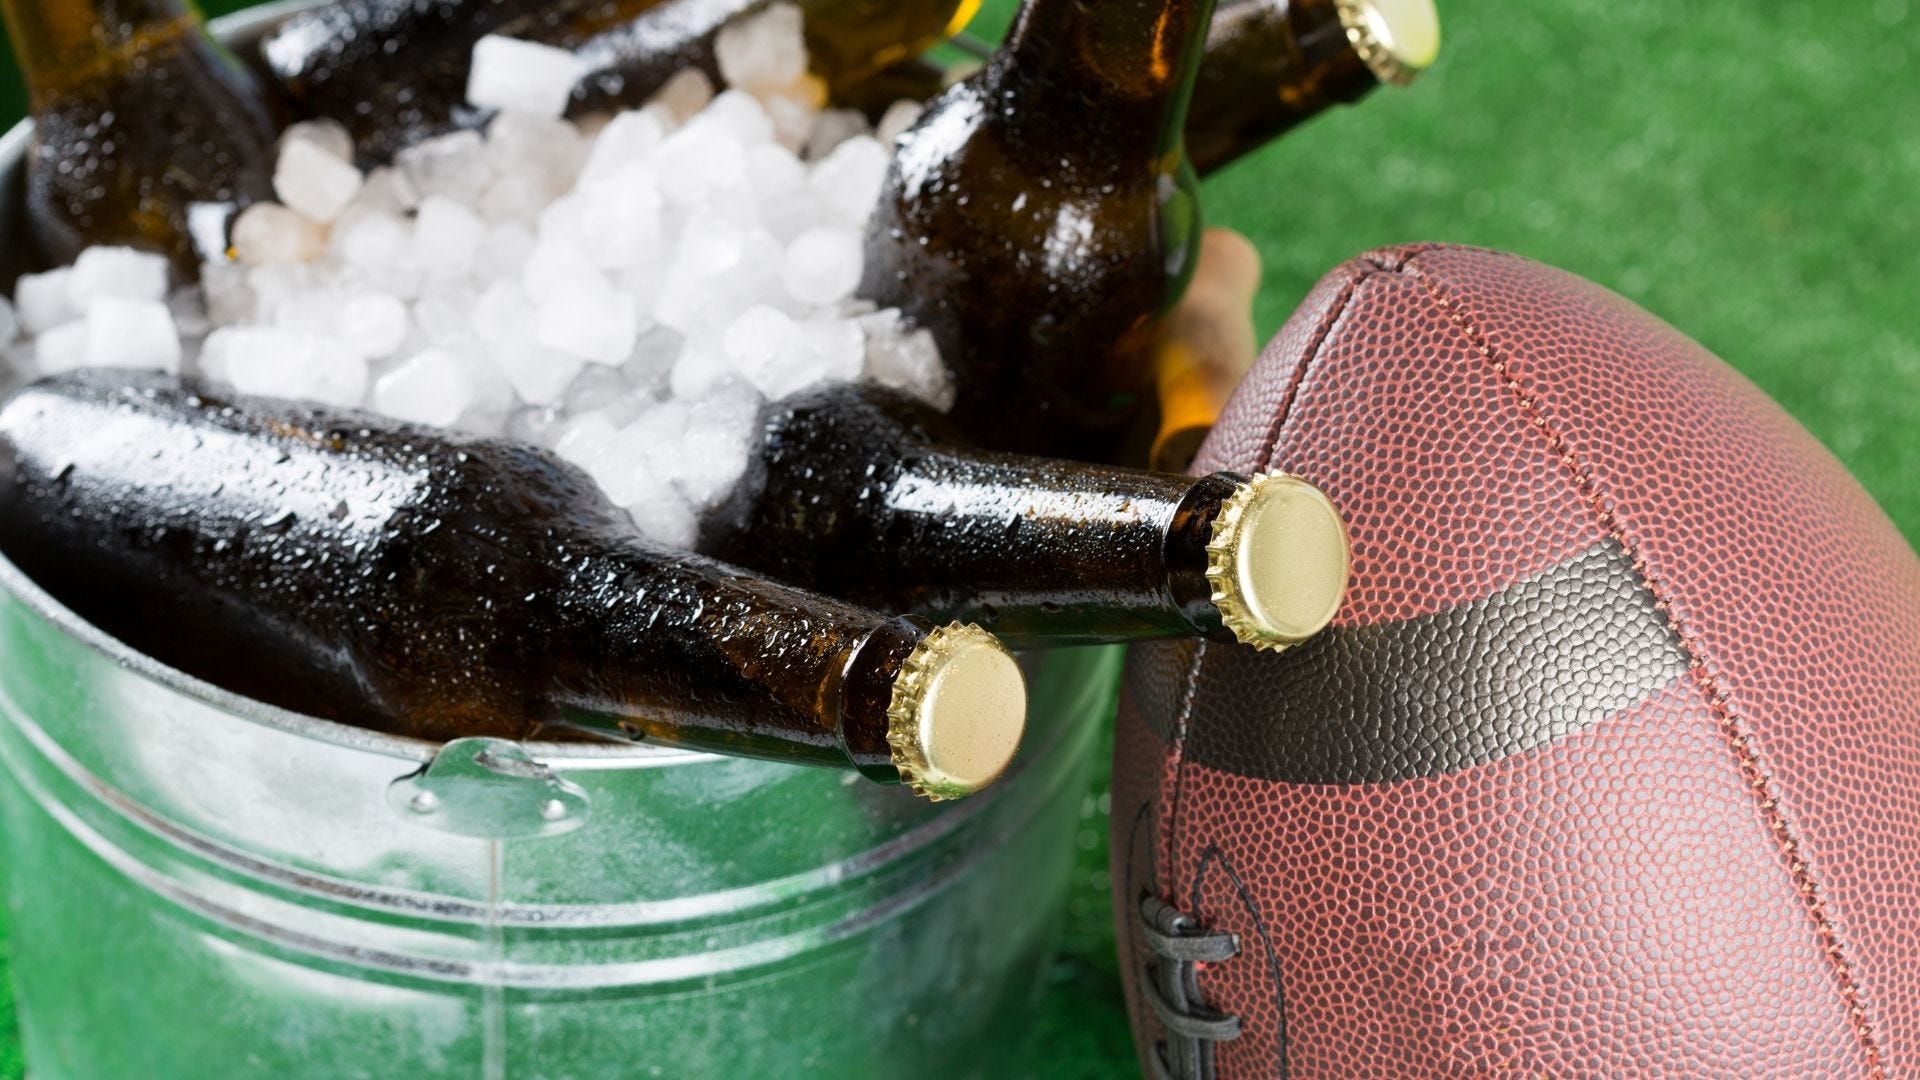 Inflation relief: Super Bowl favorites like guacamole, chicken wings will cost less this year